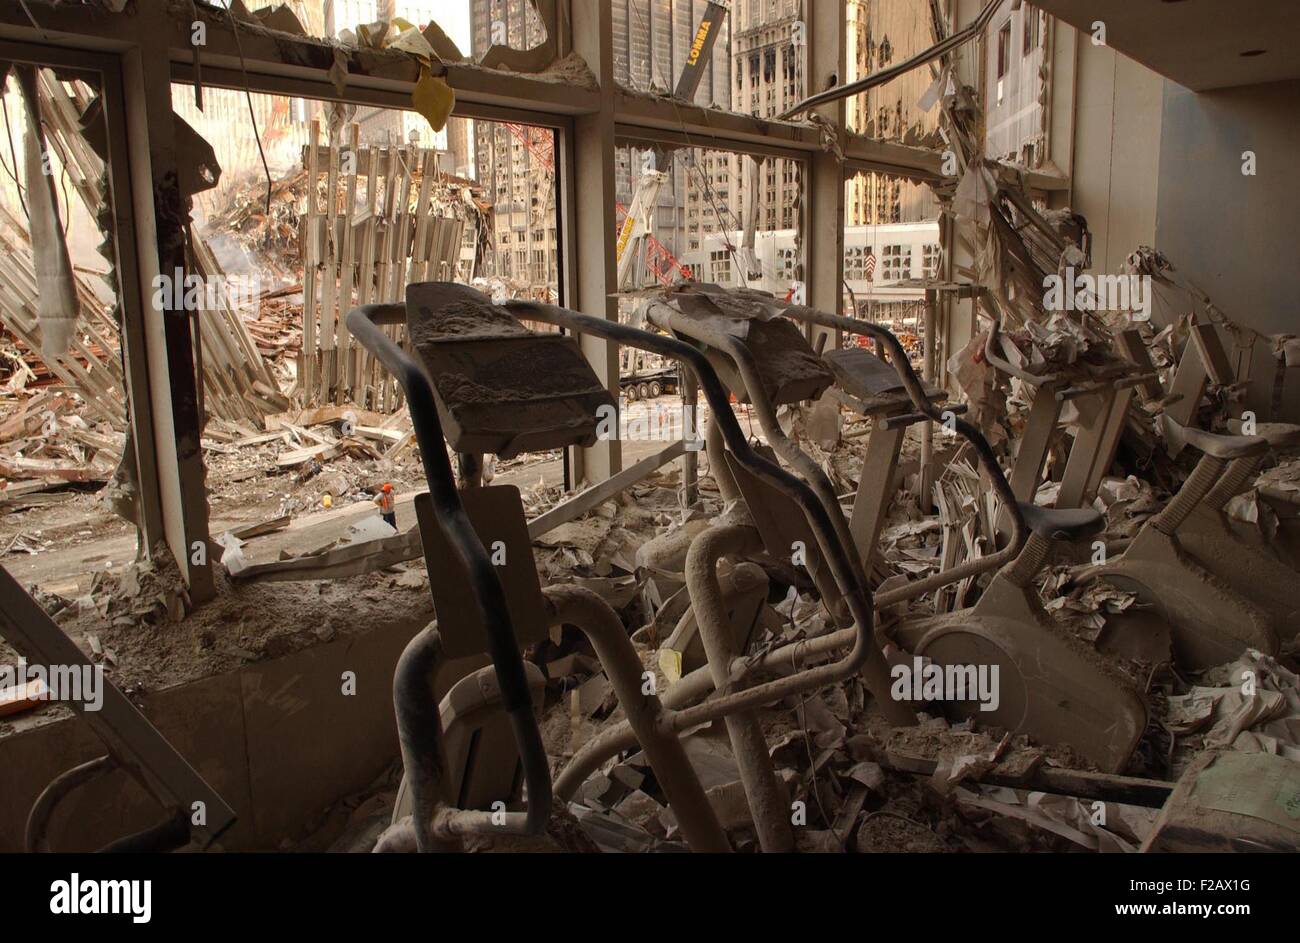 A health club in World Financial Center 2 after the 9-11 attacks, Sept. 18, 2001. It was across the West Side Highway from WTC 1, the North Tower. World Trade Center, New York City, after September 11, 2001 terrorist attacks. (BSLOC 2015 2 98) Stock Photo